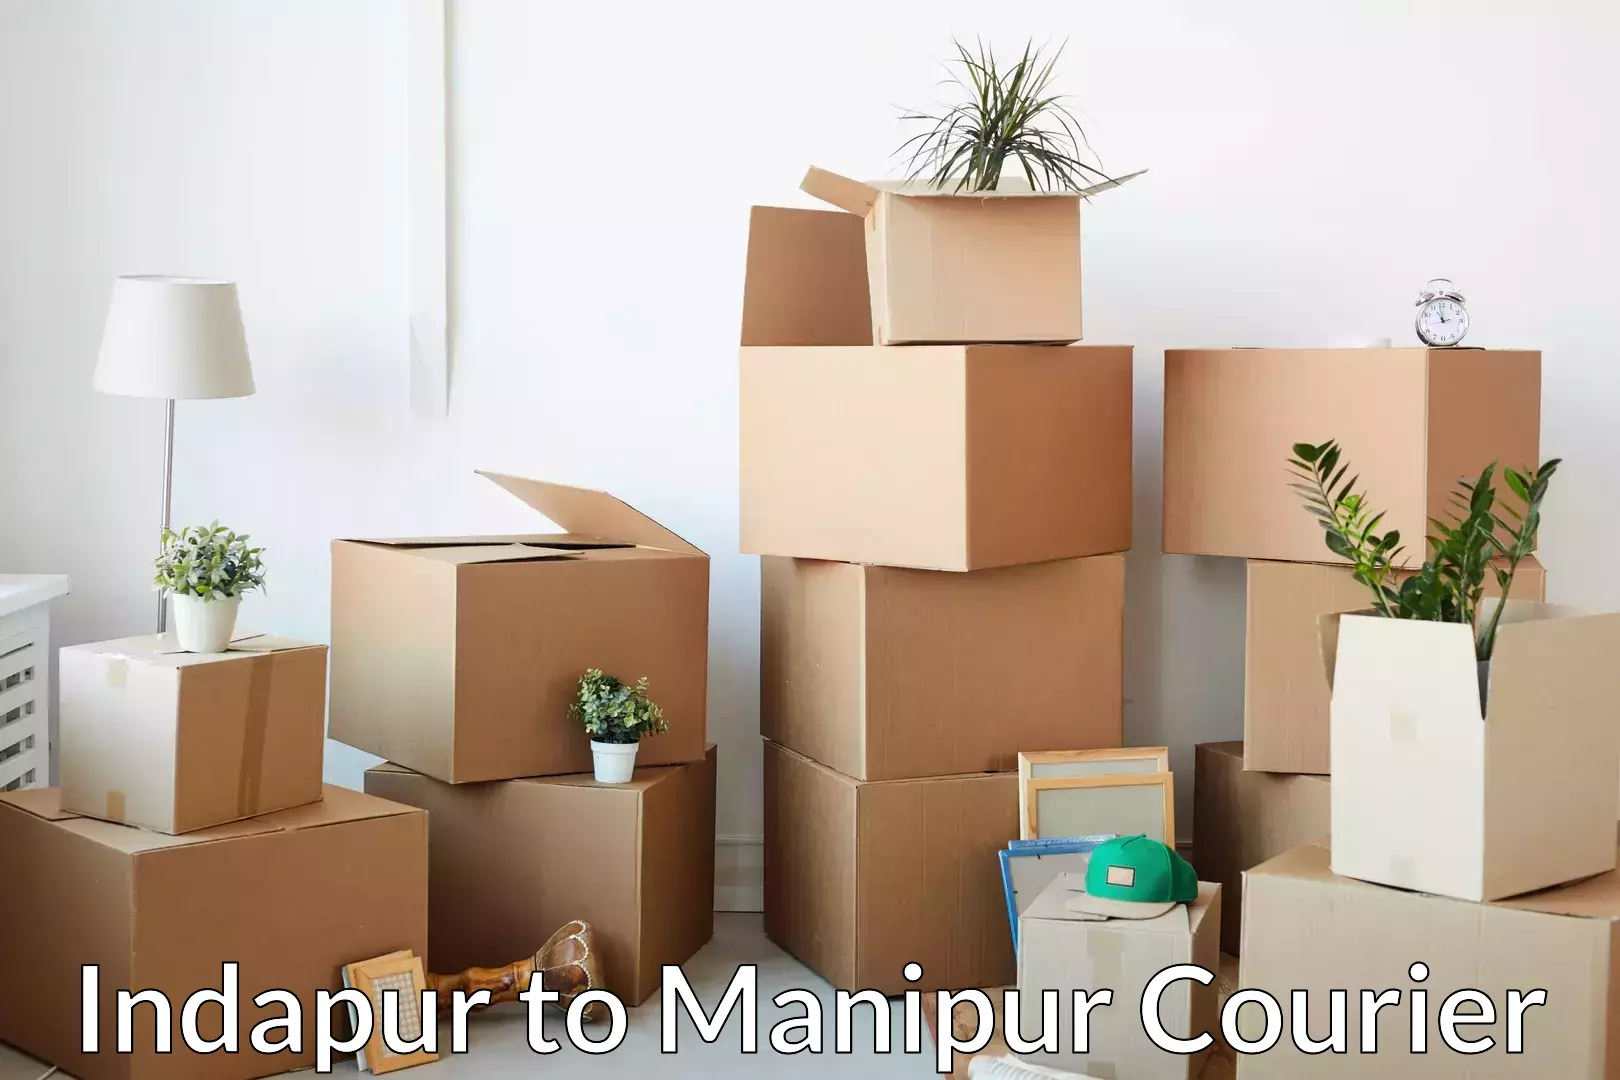 Trusted relocation experts Indapur to Kanti